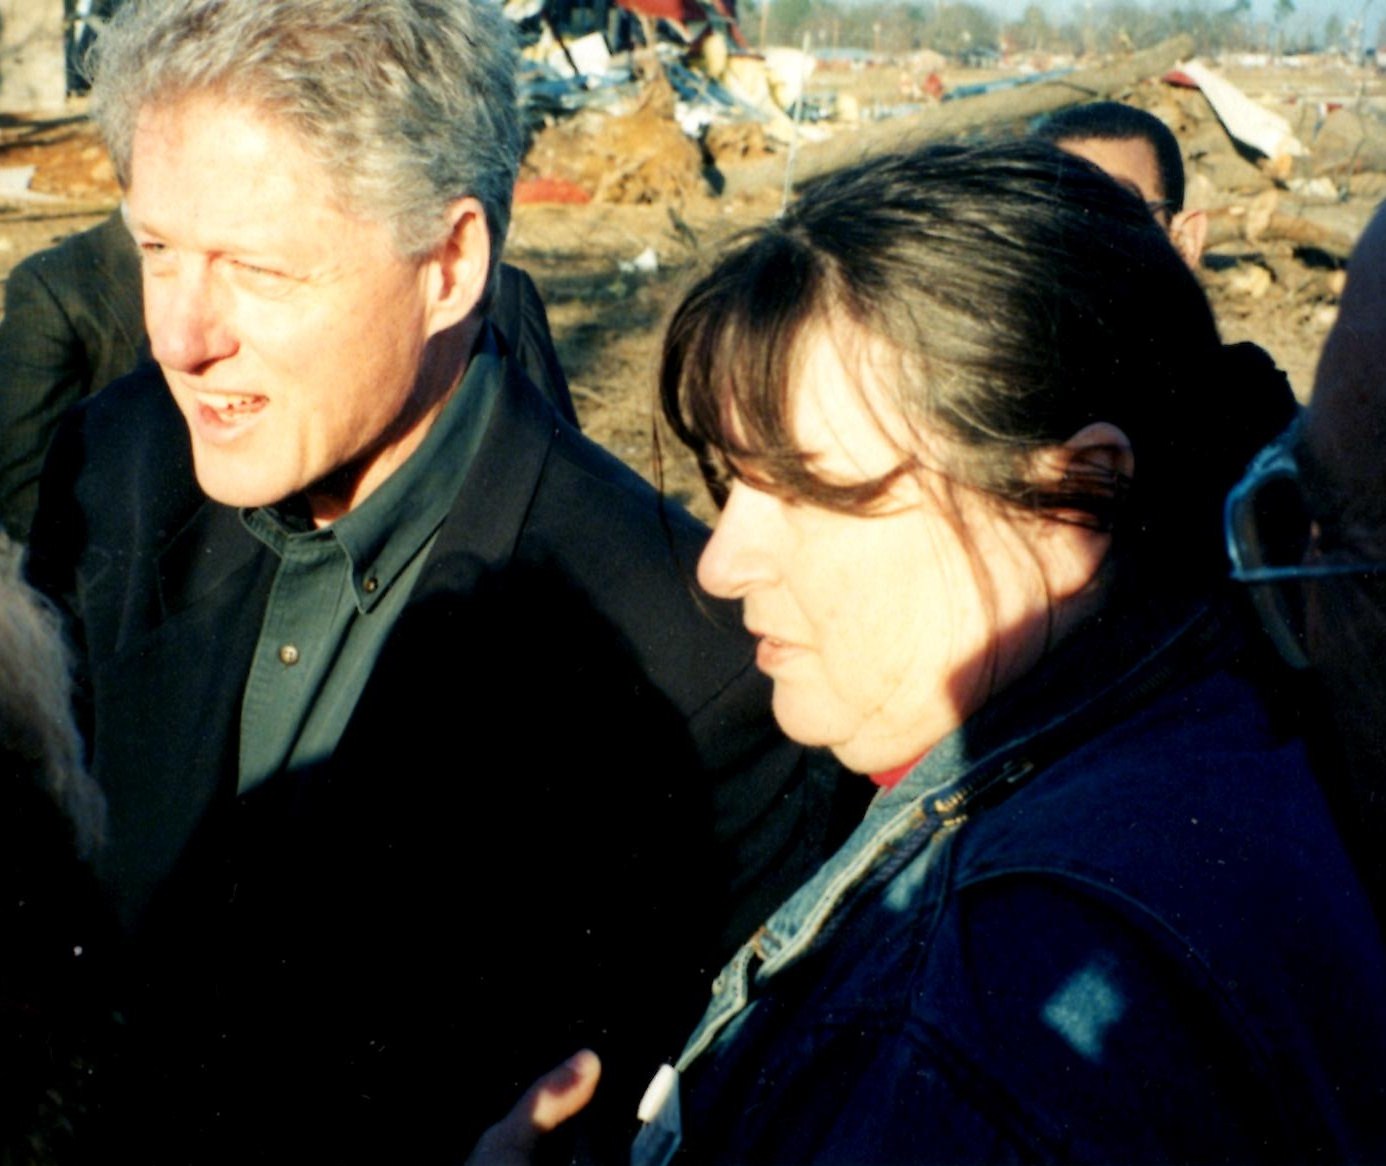 Martha's sister Melva, with President Clinton. (Melva has donated her hair to cancer patients for many years, and is doing it again while facing her own cancer challenge. A wonderful person.)